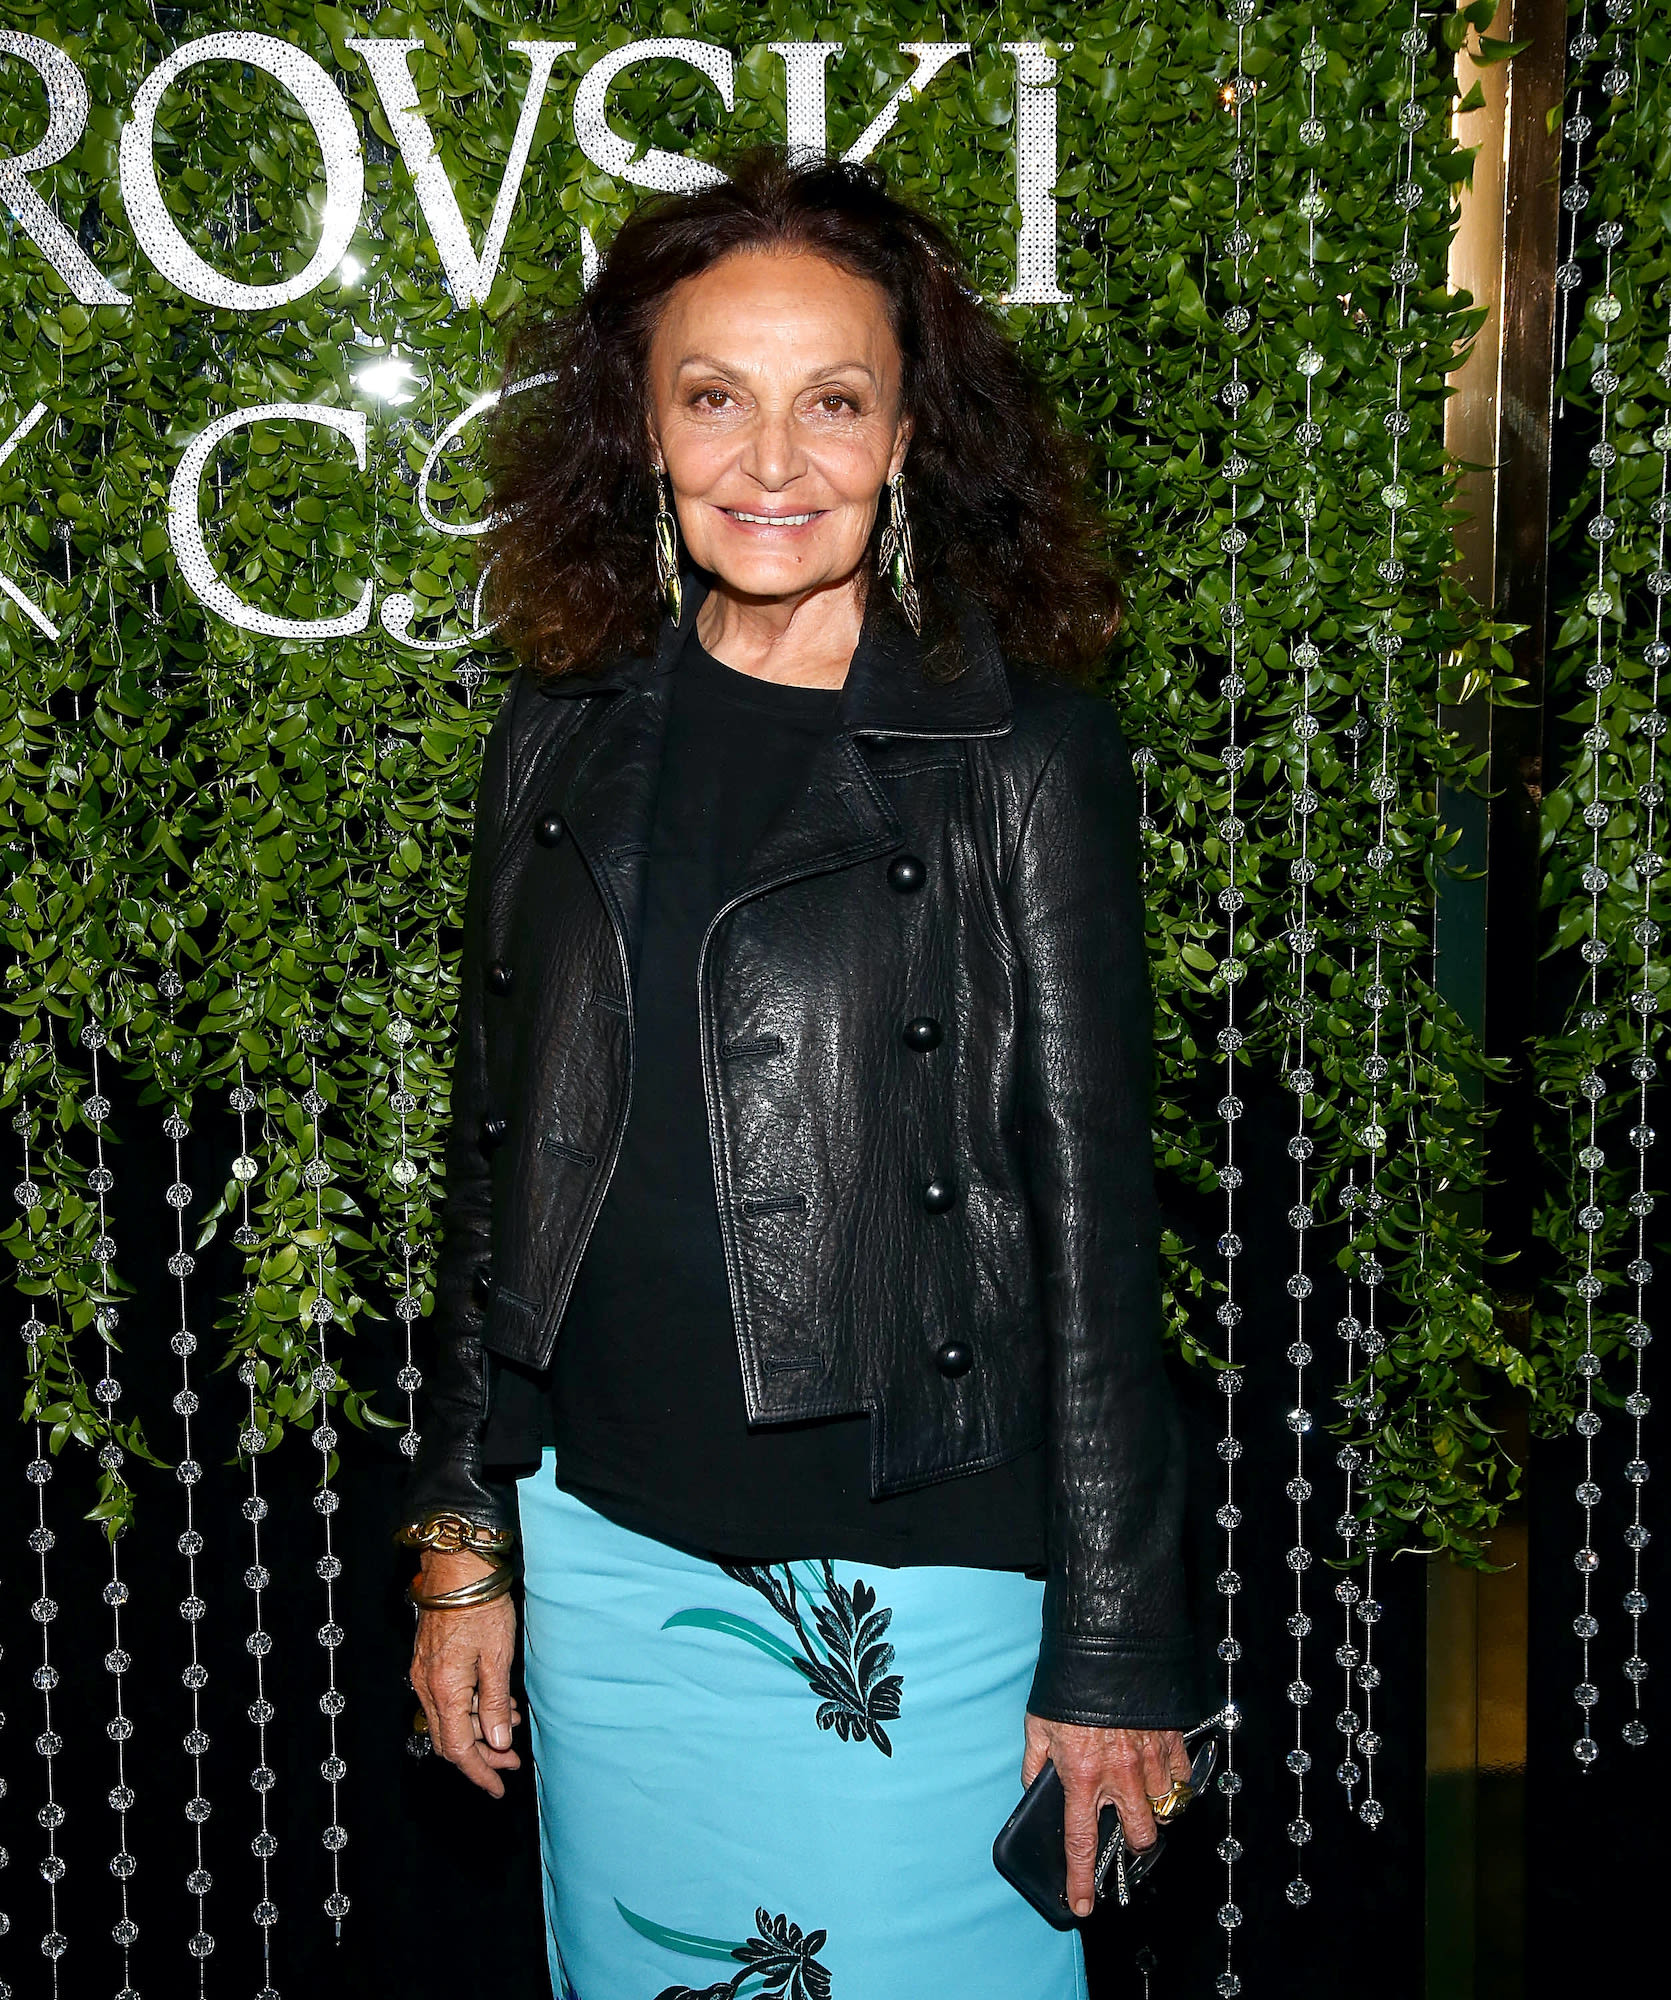 Diane von Furstenberg Turned Down Threesome With Mick Jagger and David Bowie